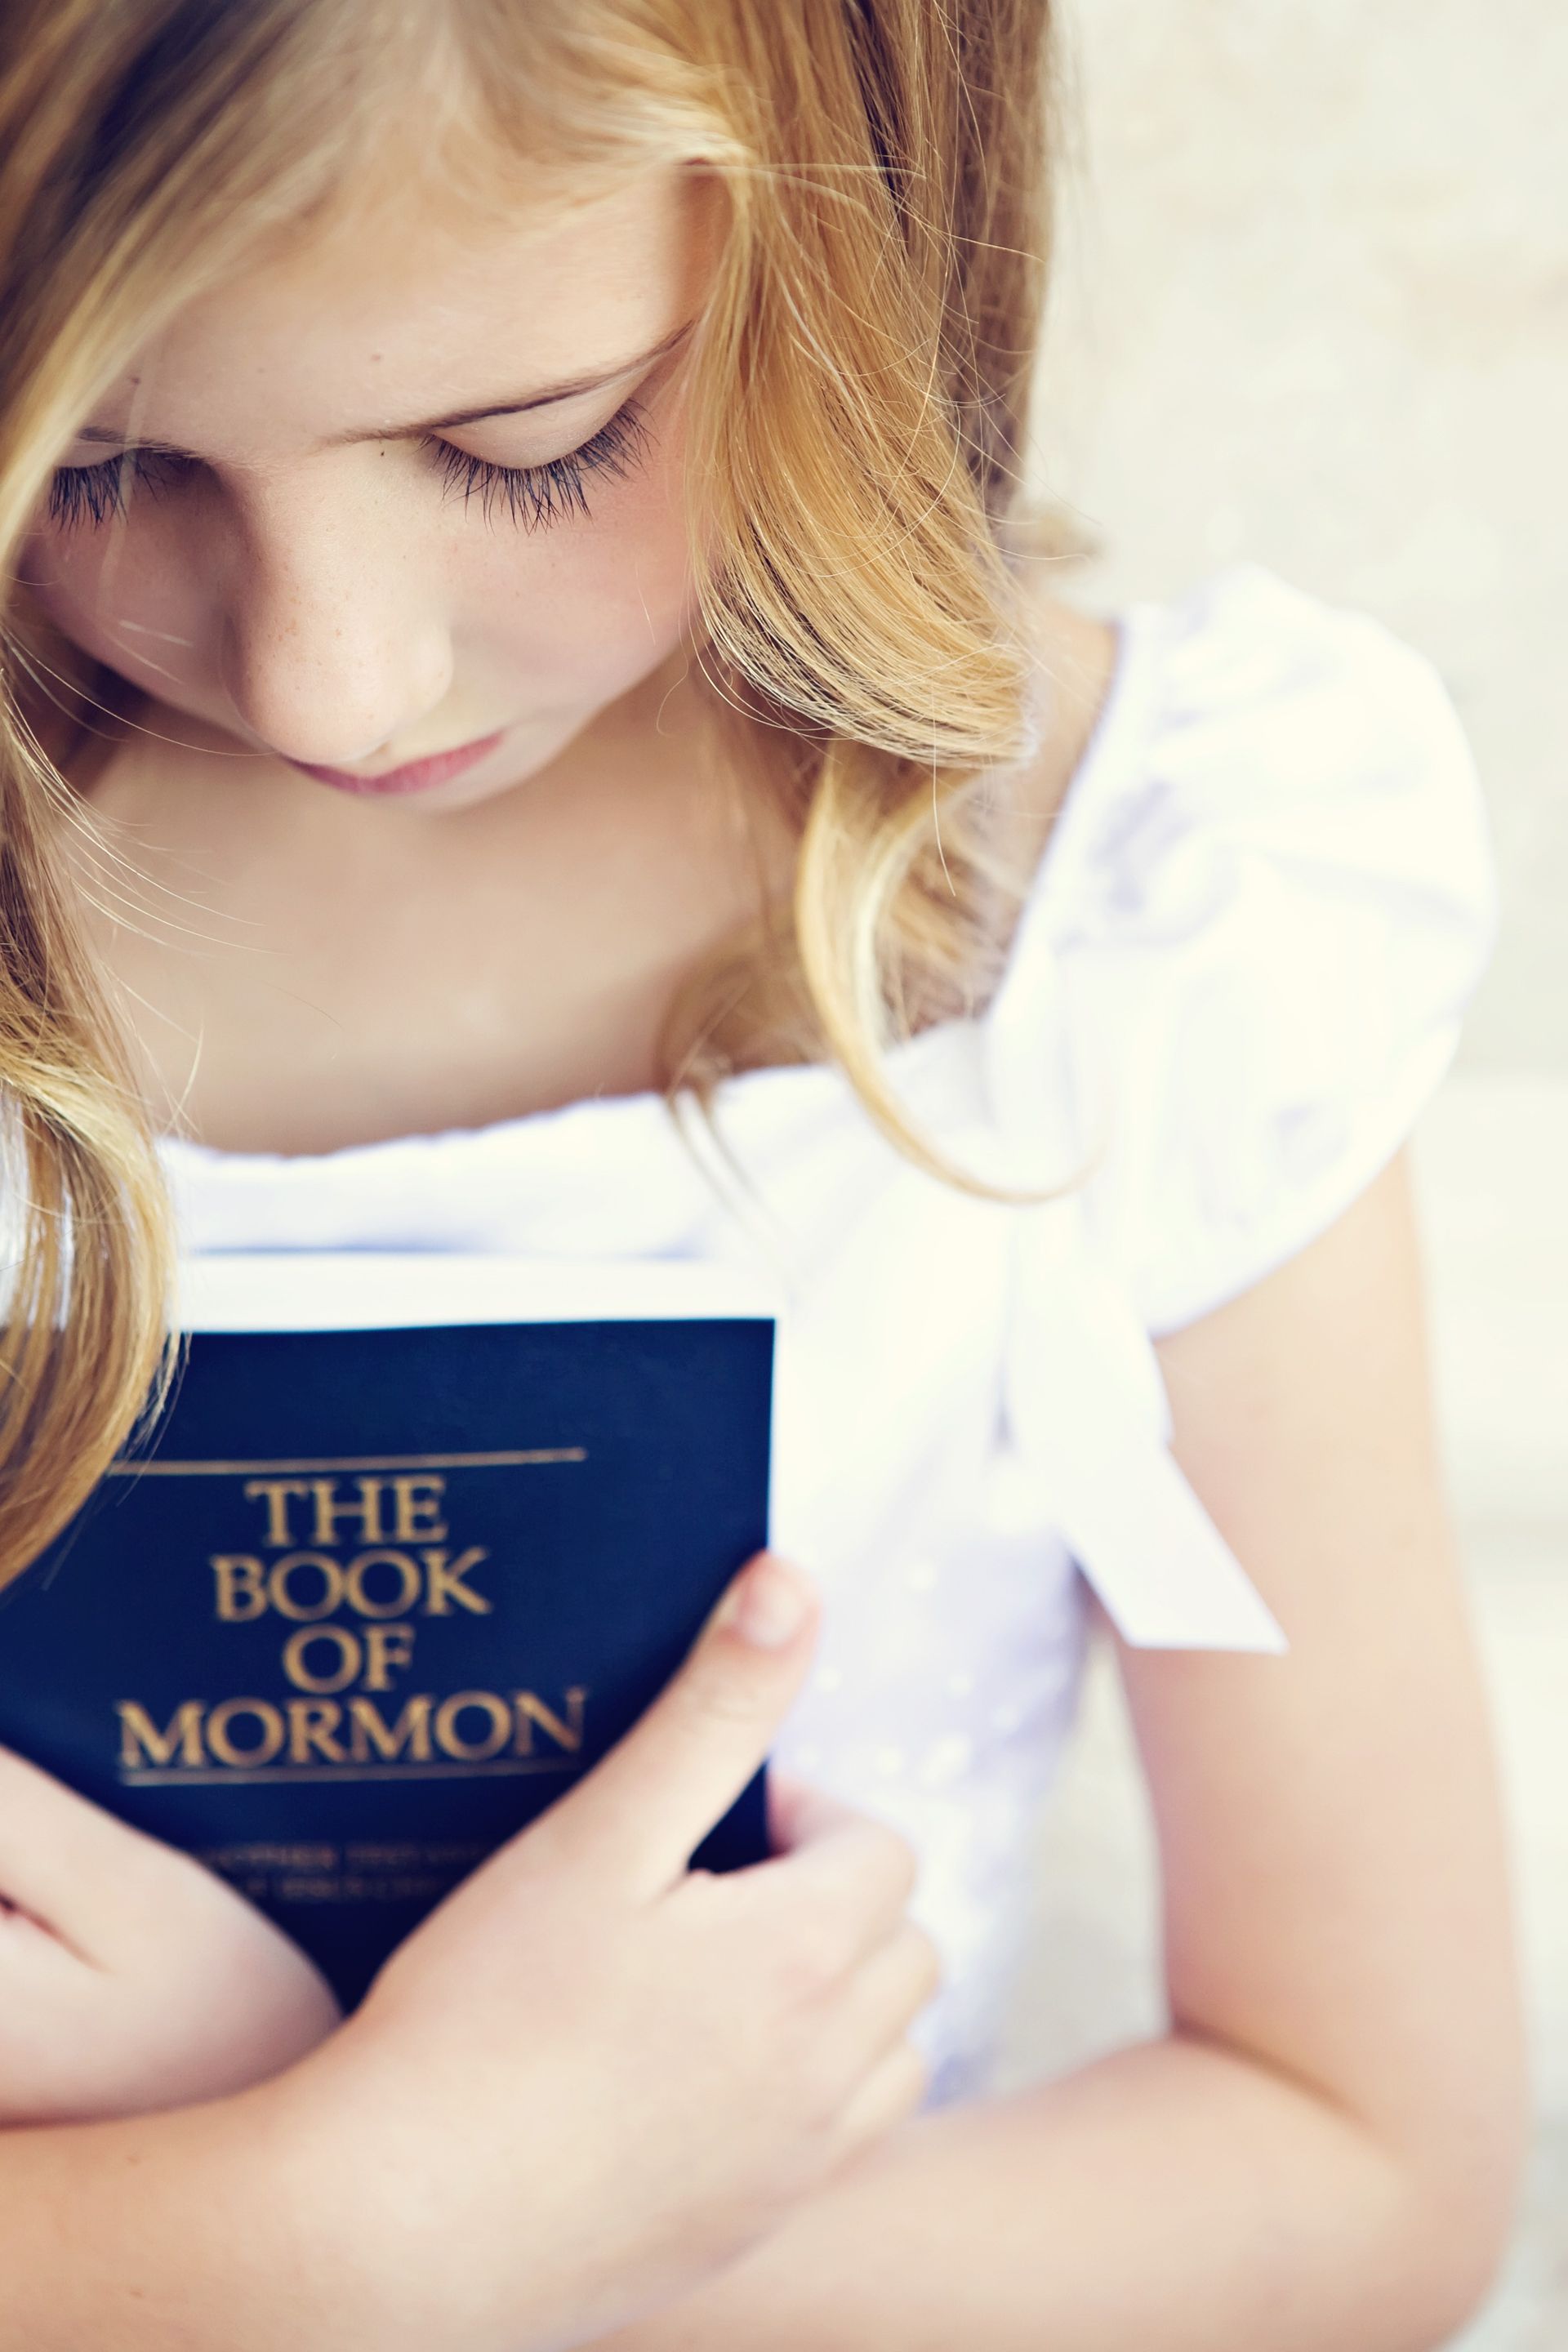 A young girl in a white dress holding a copy of the Book of Mormon.